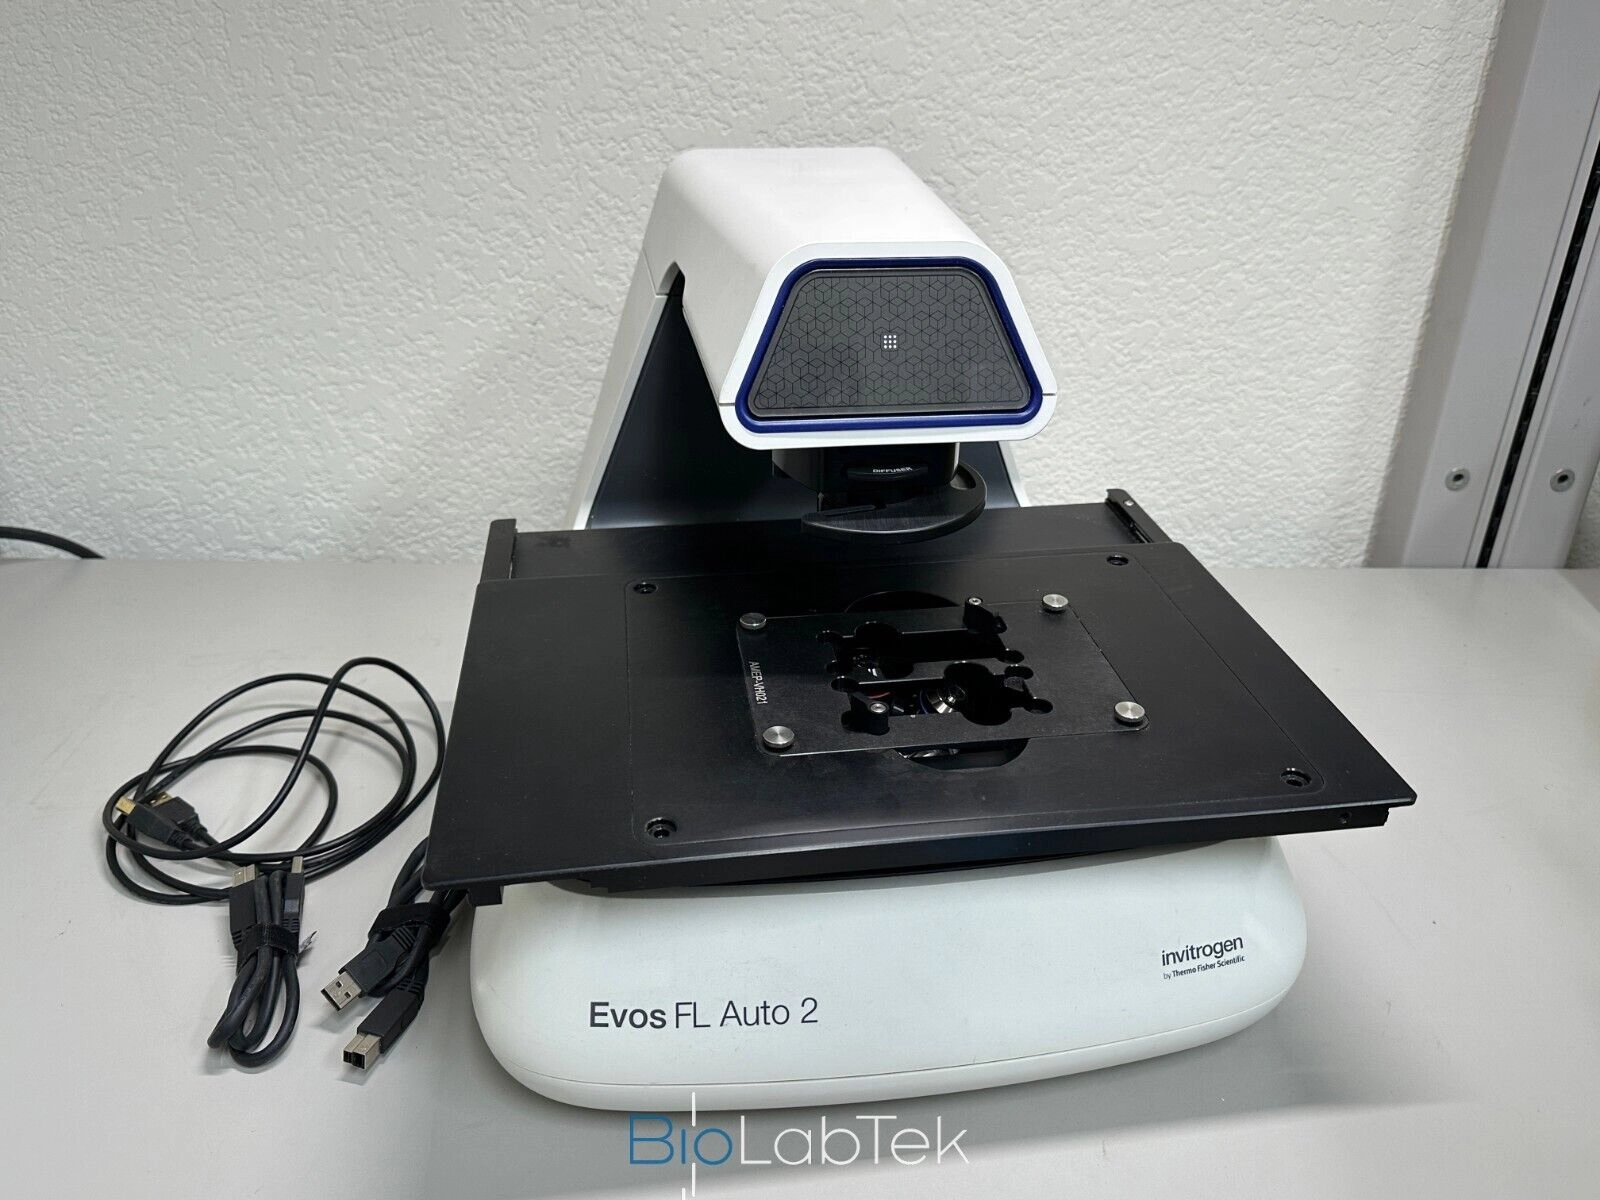 Thermo invitrogen Evos FL Auto 2 Cell Imager with 